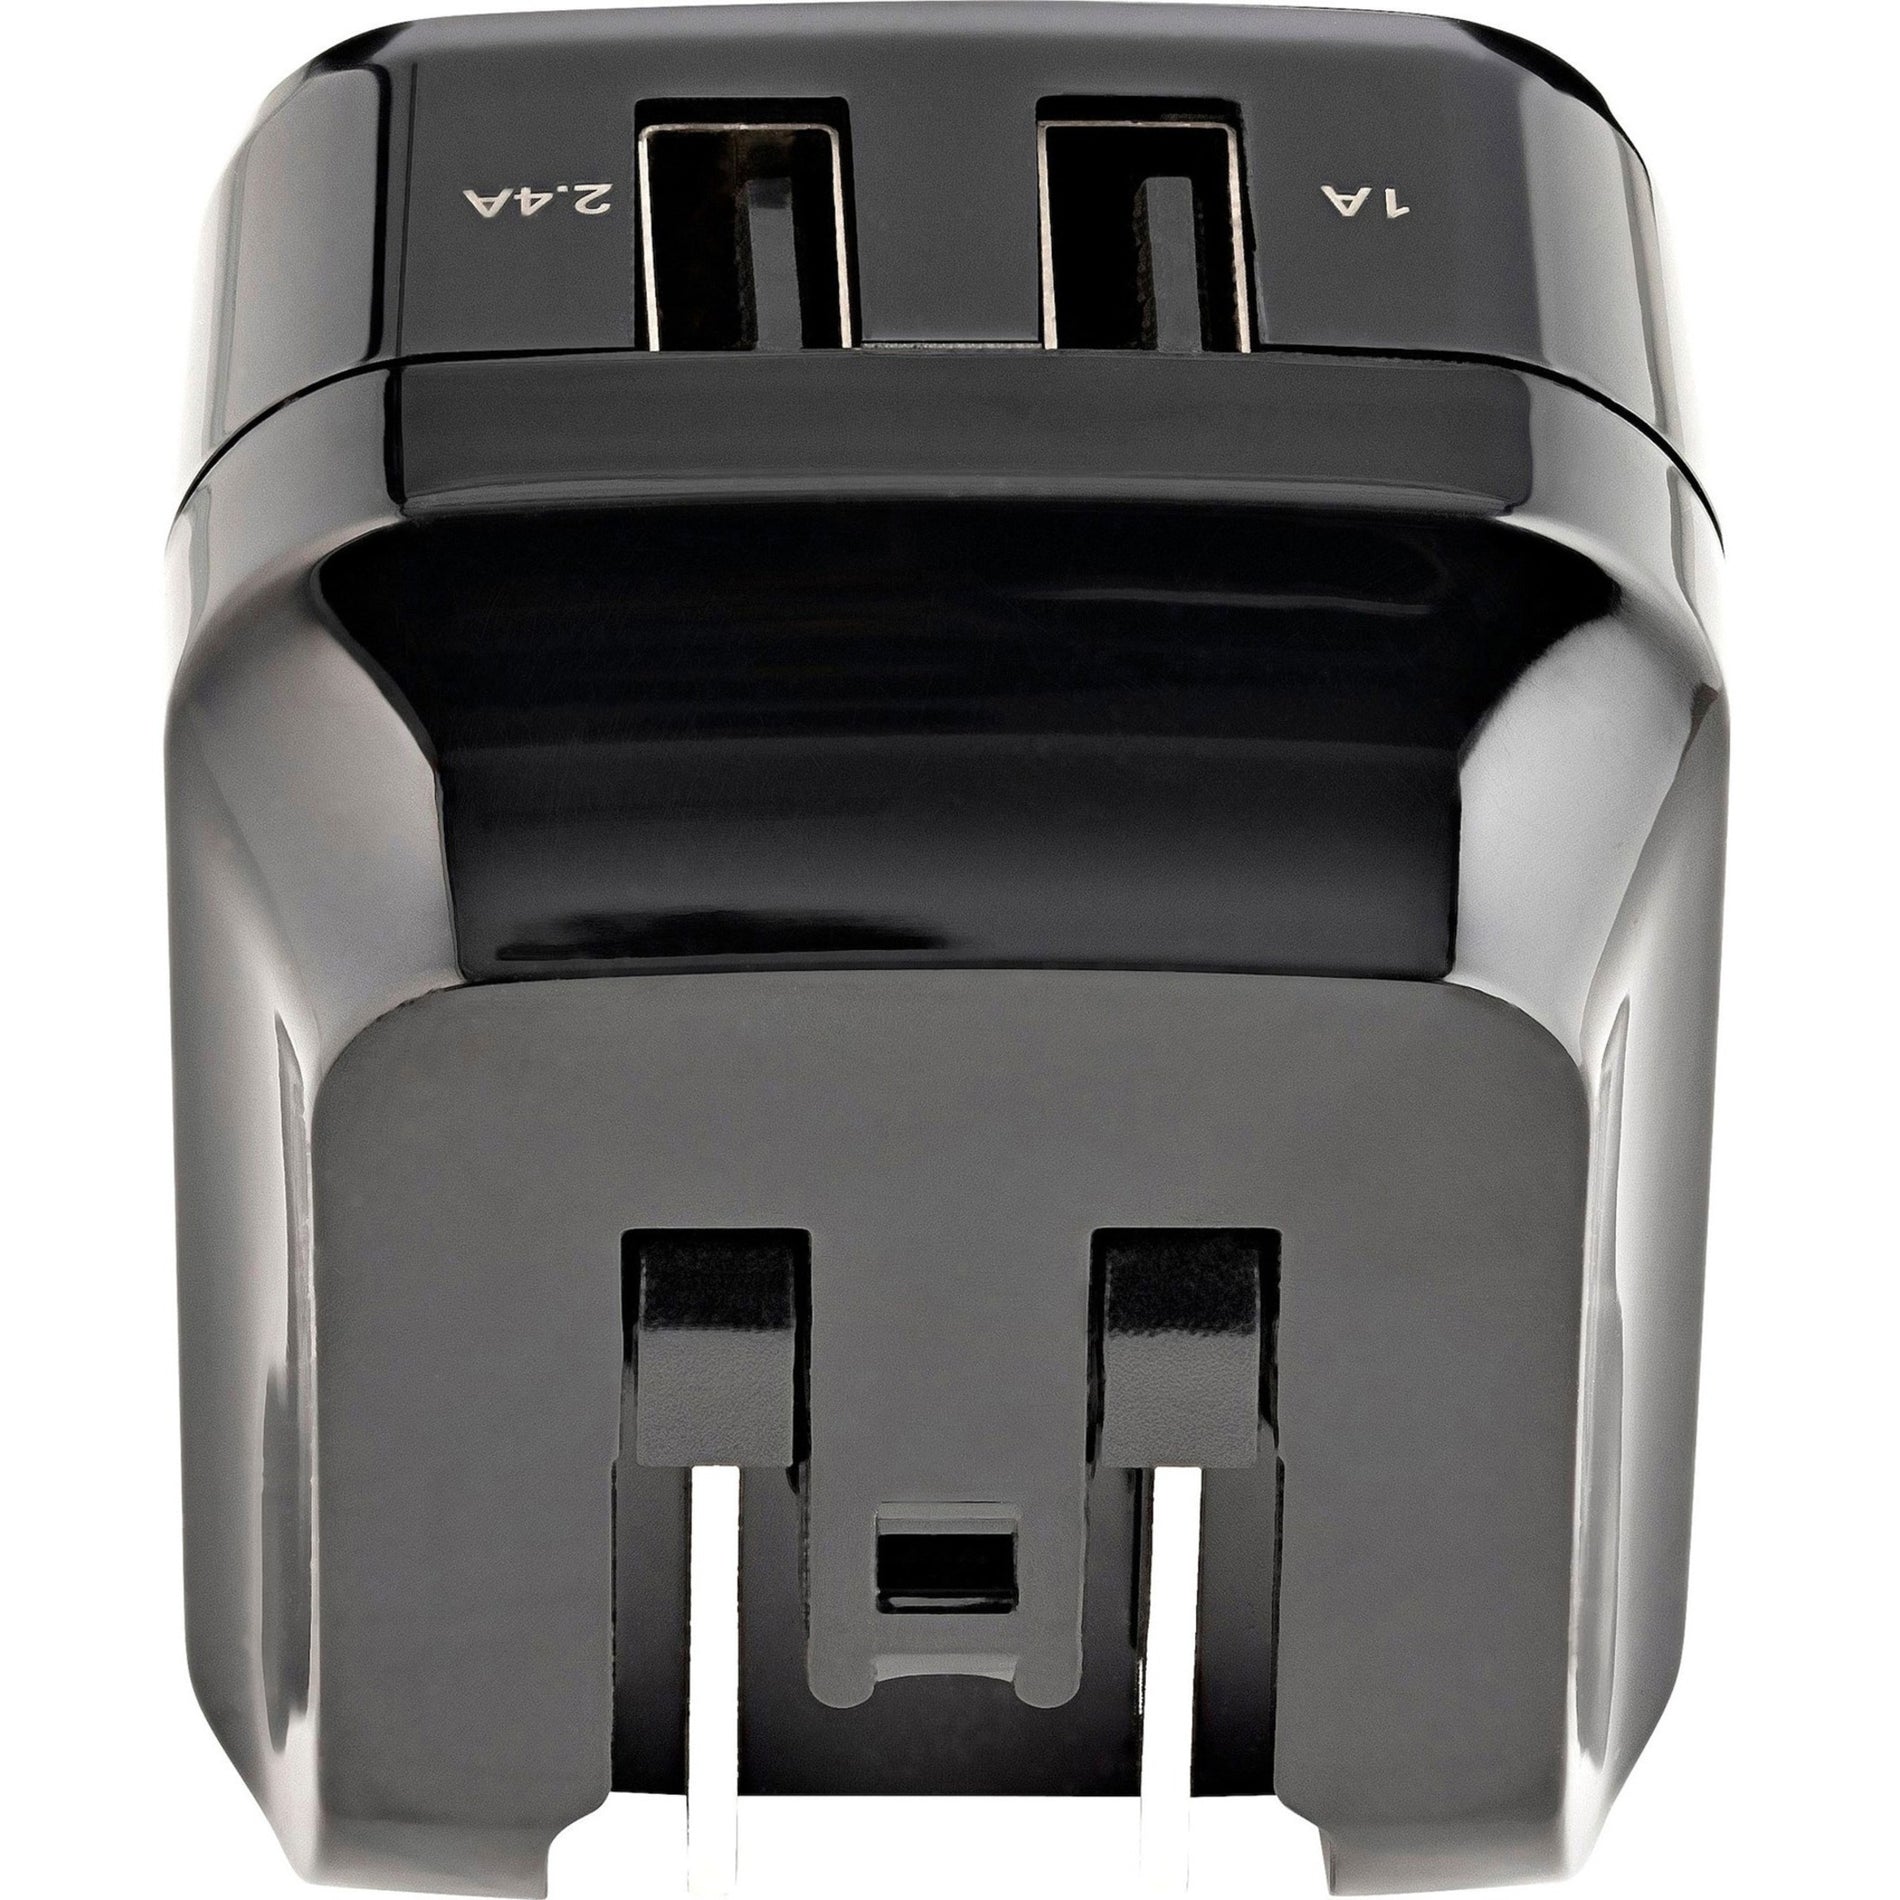 StarTech.com USB2PACUBK 2 Port USB Wall Charger, Dual USB-A Power Adapter, Portable Charger for Phones/Tablets